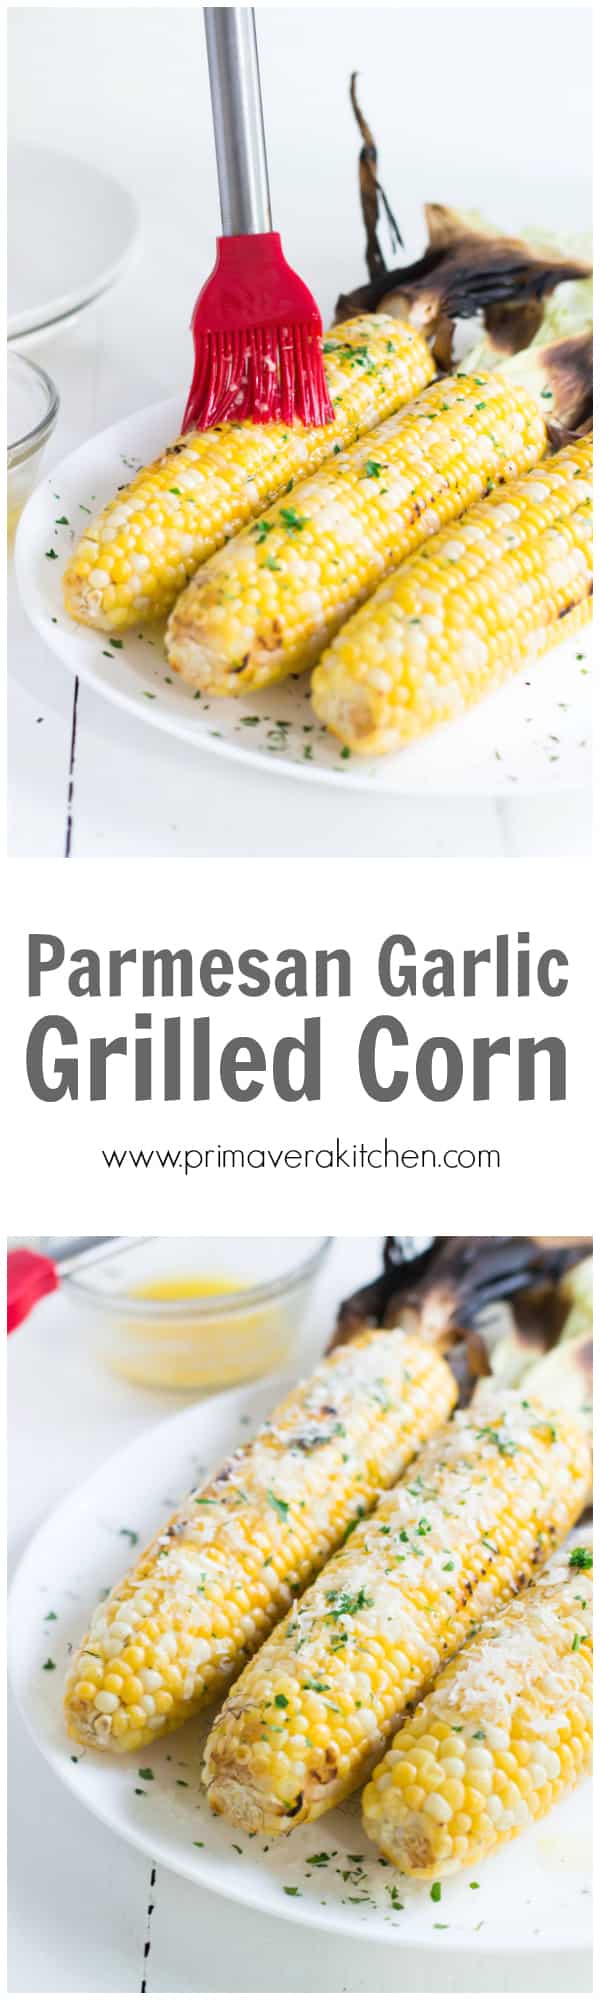 Parmesan Garlic Grilled Corn - This Parmesan Garlic Grilled Corn is juicy, tender, super flavourful and easy to make. Enjoy this favourite summer side dish! 